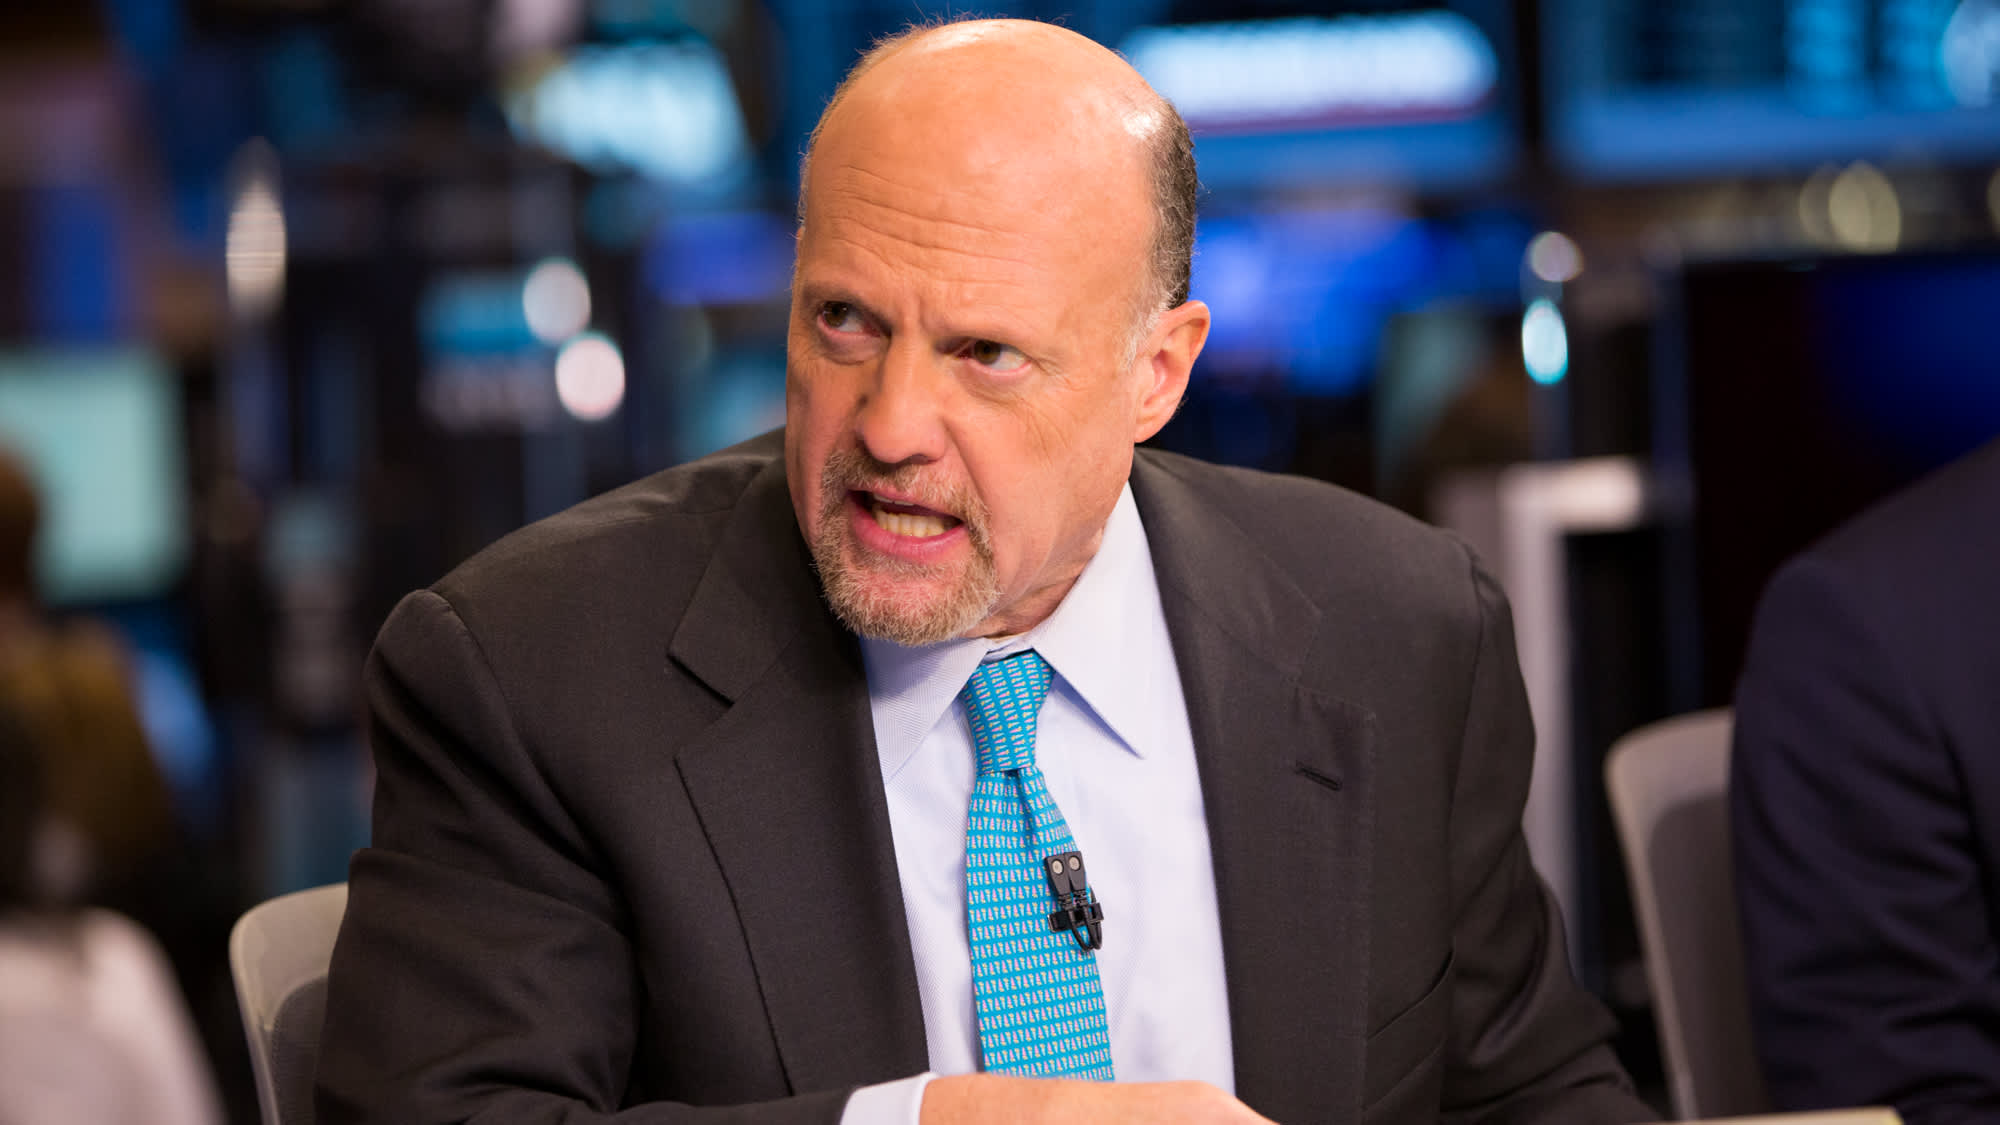 Cramer says investors should not rush to buy or sell outside of regular trading hours. Here’s why – CNBC